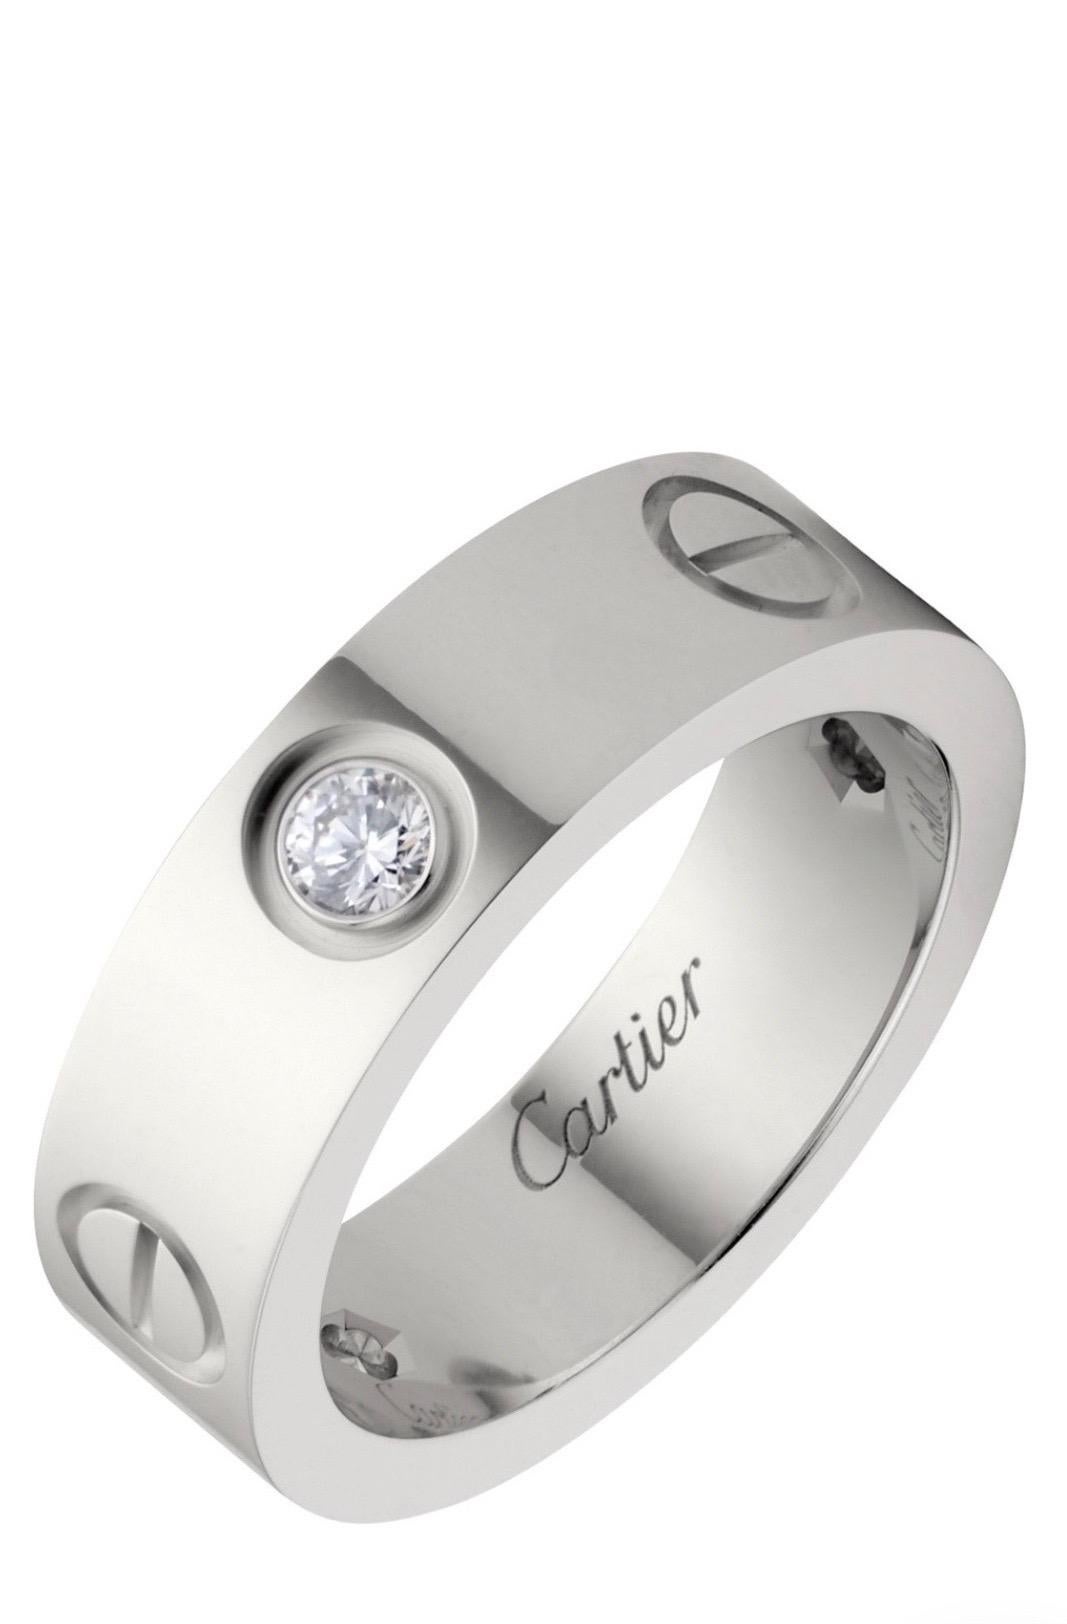 Cartier 3 Diamonds Love Ring 18k White Gold. 
Love ring, 18K white gold, set with 3 brilliant-cut diamonds totaling 0.22 carats. 
Width: 5.5mm. 
Size: 7.5

About The Collection:
A child of 1970s New York, the LOVE collection remains today an iconic